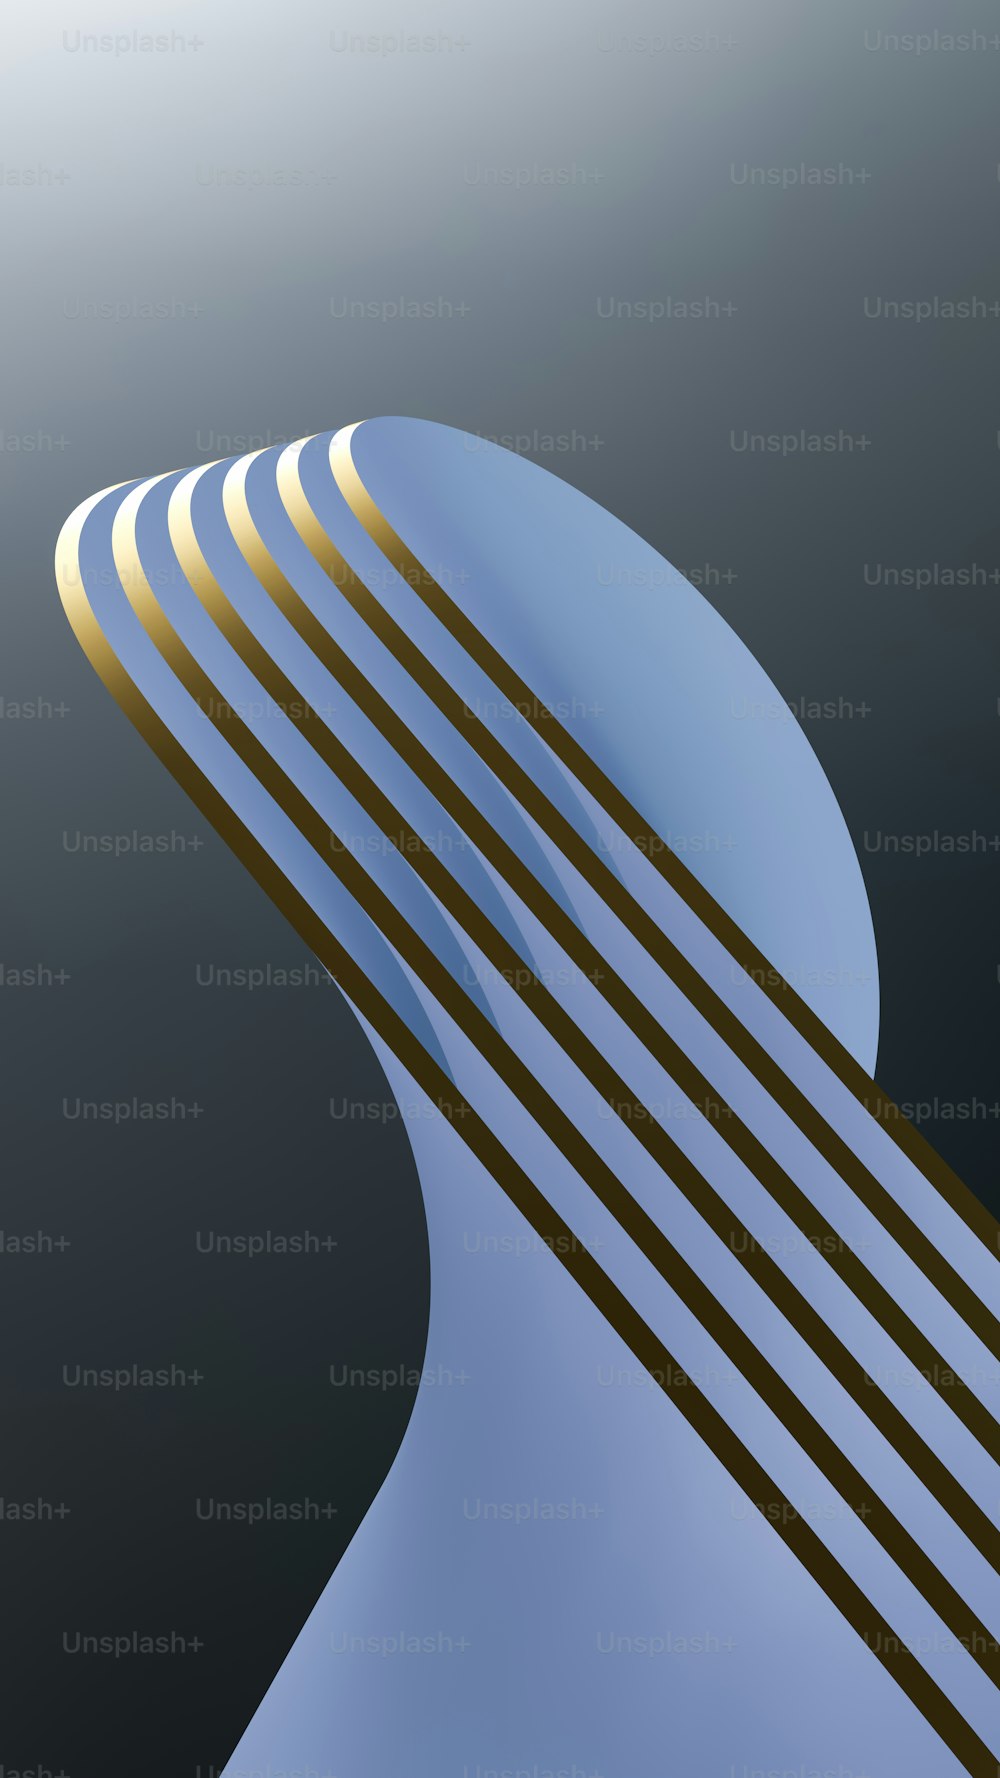 an abstract image of a curved structure with gold and blue stripes